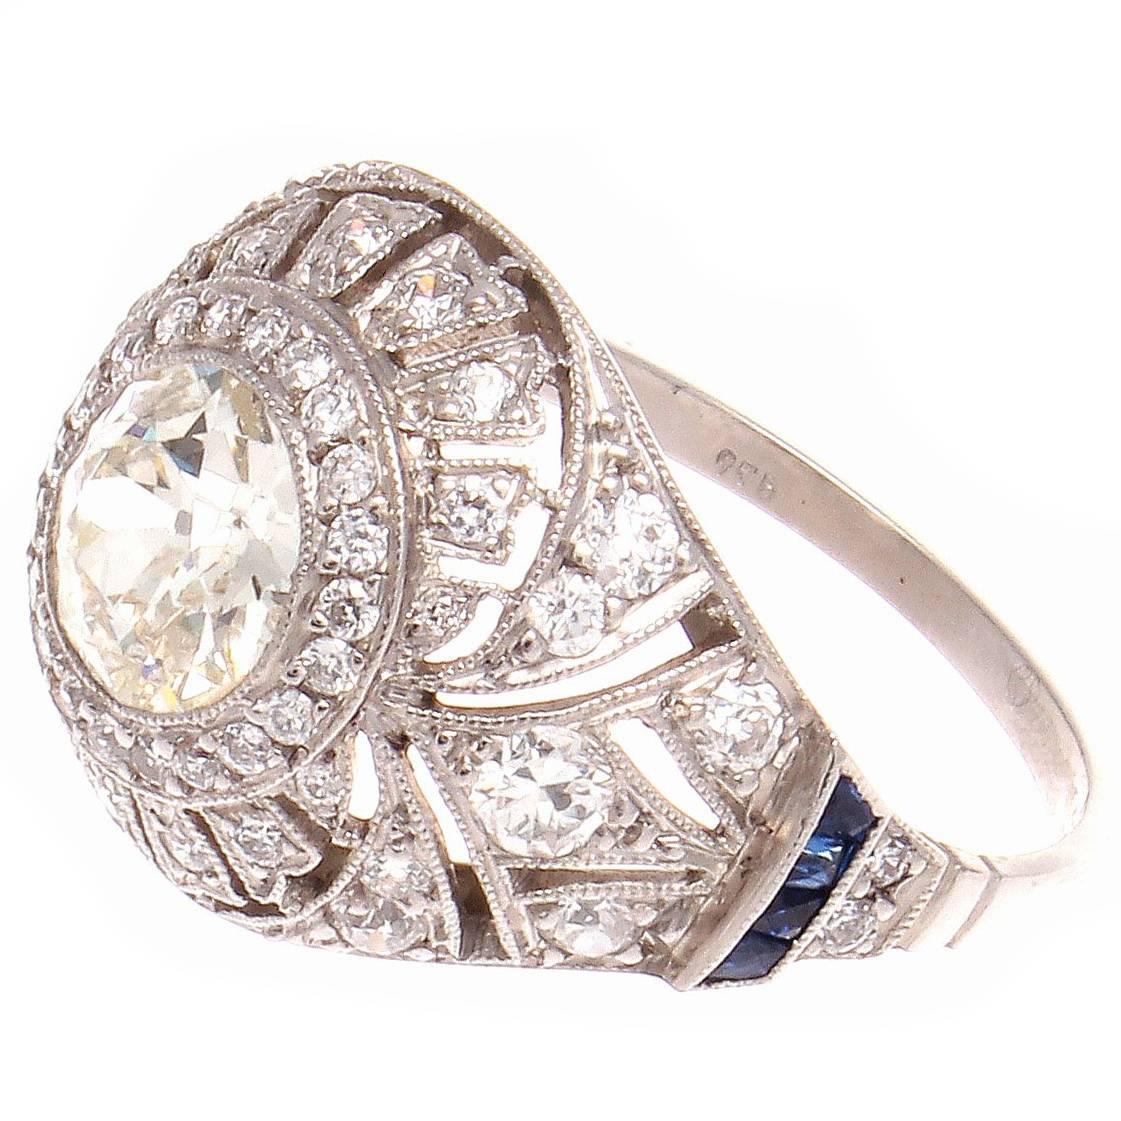 The allure of the Art Deco time period has inspired the creation of this intricately designed dome ring. Featuring a charming  1.13 carat old European cut diamond that is surrounded by strategically  placed matching diamonds and vibrant blue